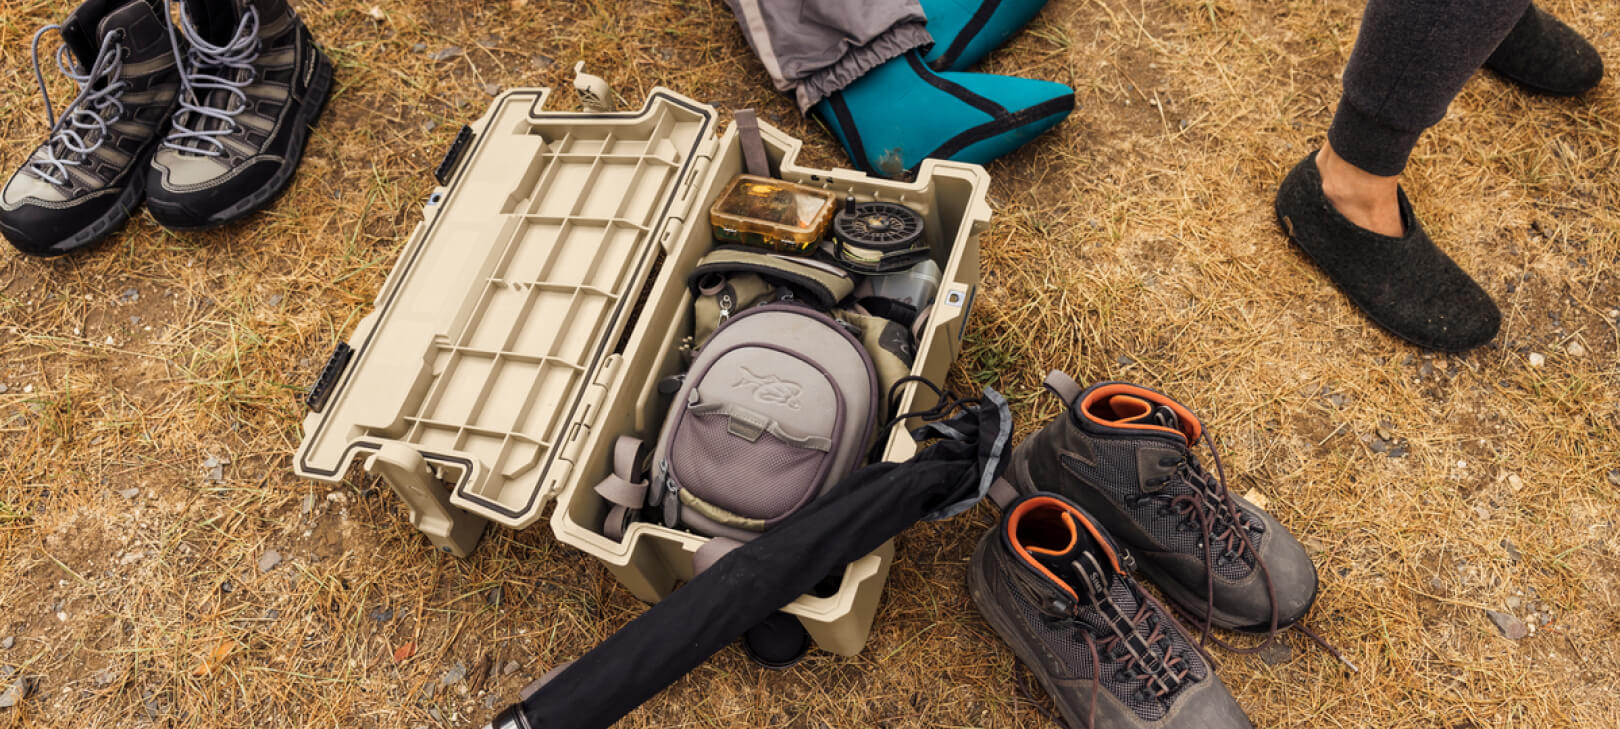 Tan Sixer 16 being used for fly fishing gear storage